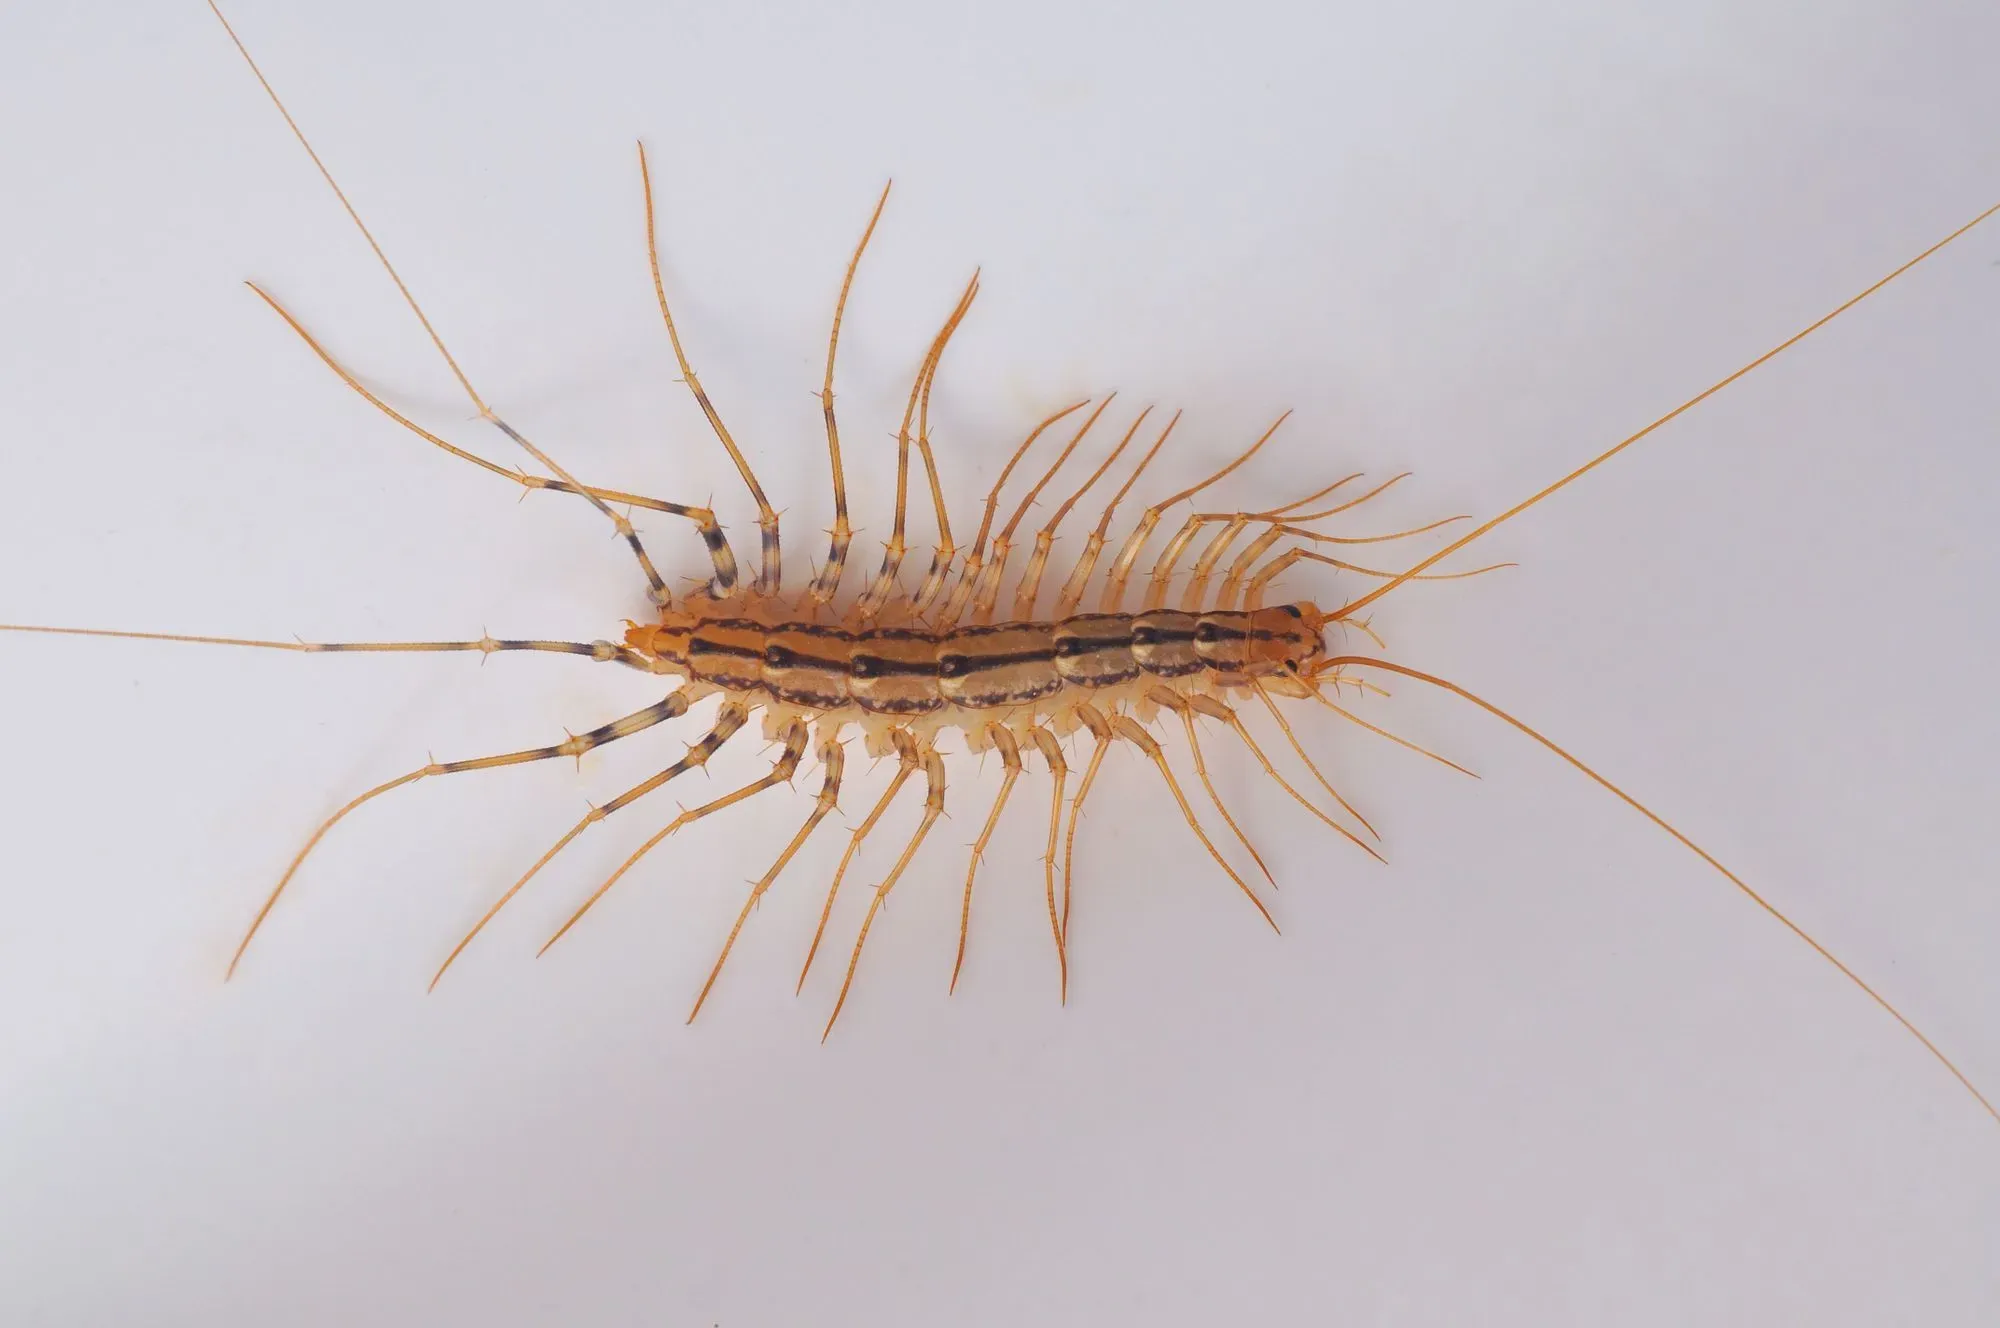 Read do house centipedes bite to know if these creatures can inject venom and if they should be eliminated from your house immediately!